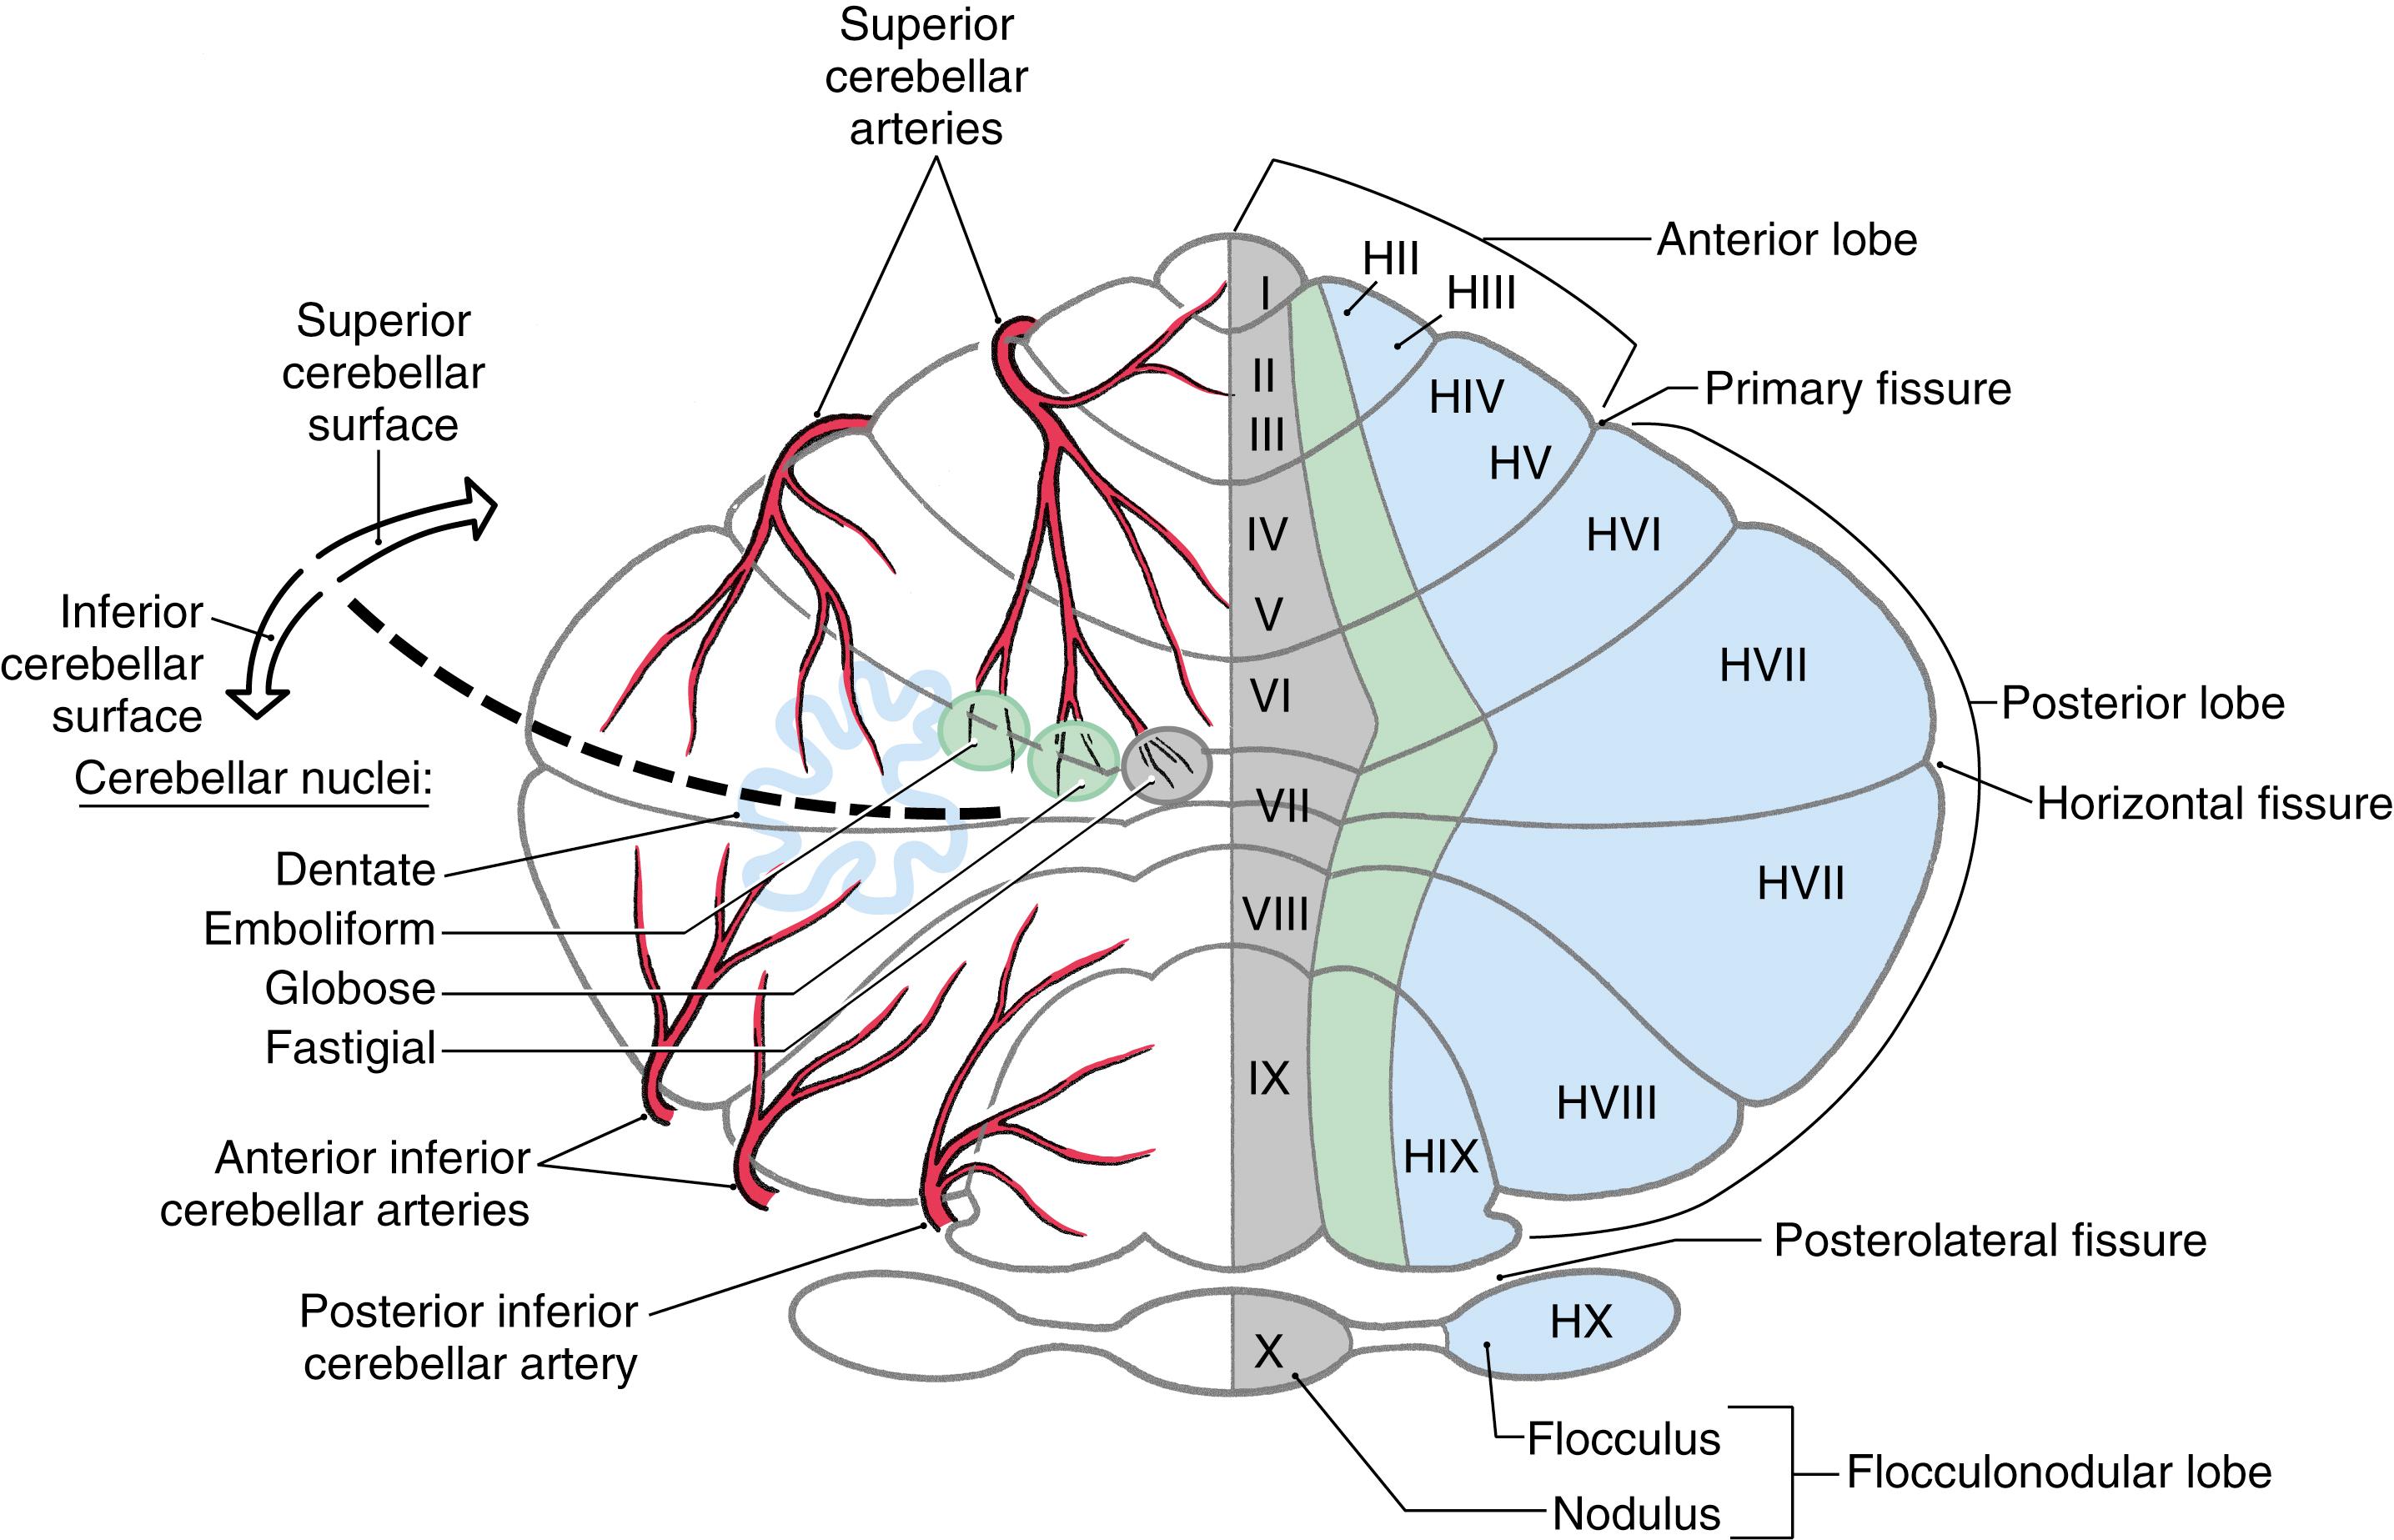 Fig. 27.5, An unfolded view of the cerebellum showing medial ( gray ), intermediate ( green ), and lateral ( blue ) zones on the right and the nuclei with which each zone is functionally associated on the left in the corresponding color. The general areas of cortex and nuclei served by the cerebellar arteries are also indicated on the left. Roman numerals indicate lobules of the vermis; numerals preceded by H indicate the corresponding lobules of the hemisphere.